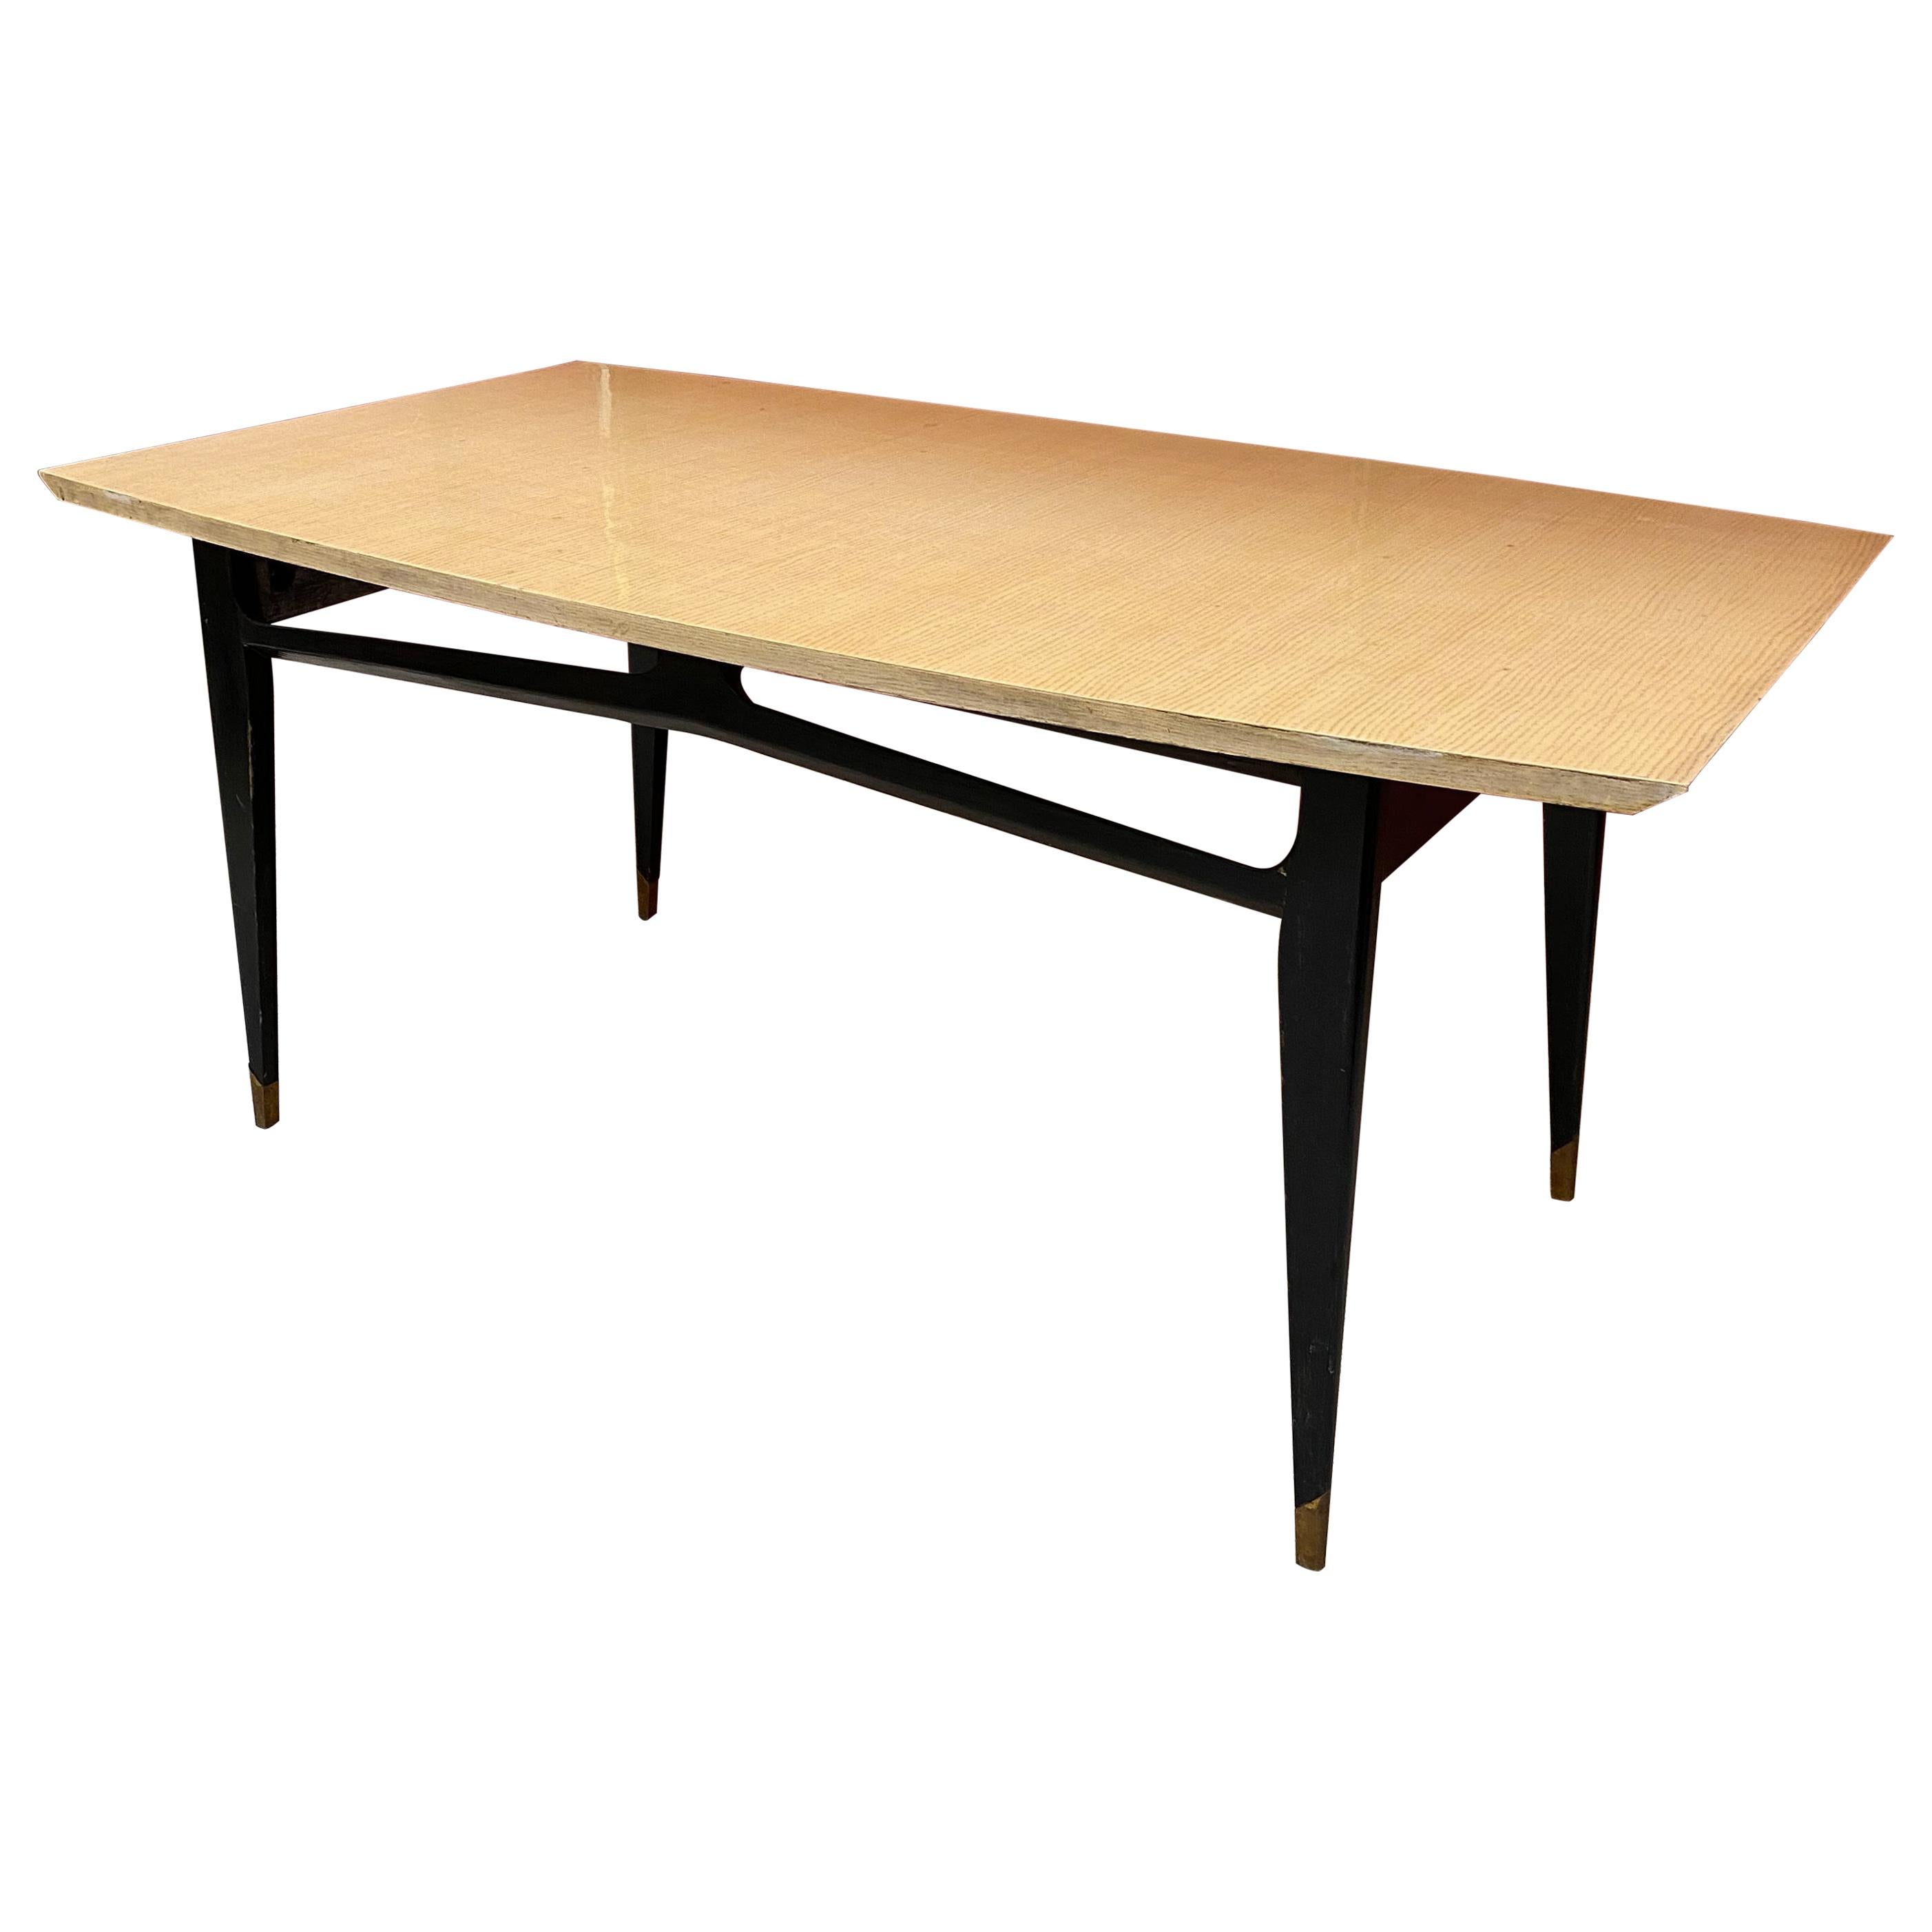 Elegant Table in Blackened Wood and Ash Veneer, in the Style of Maison Raphael